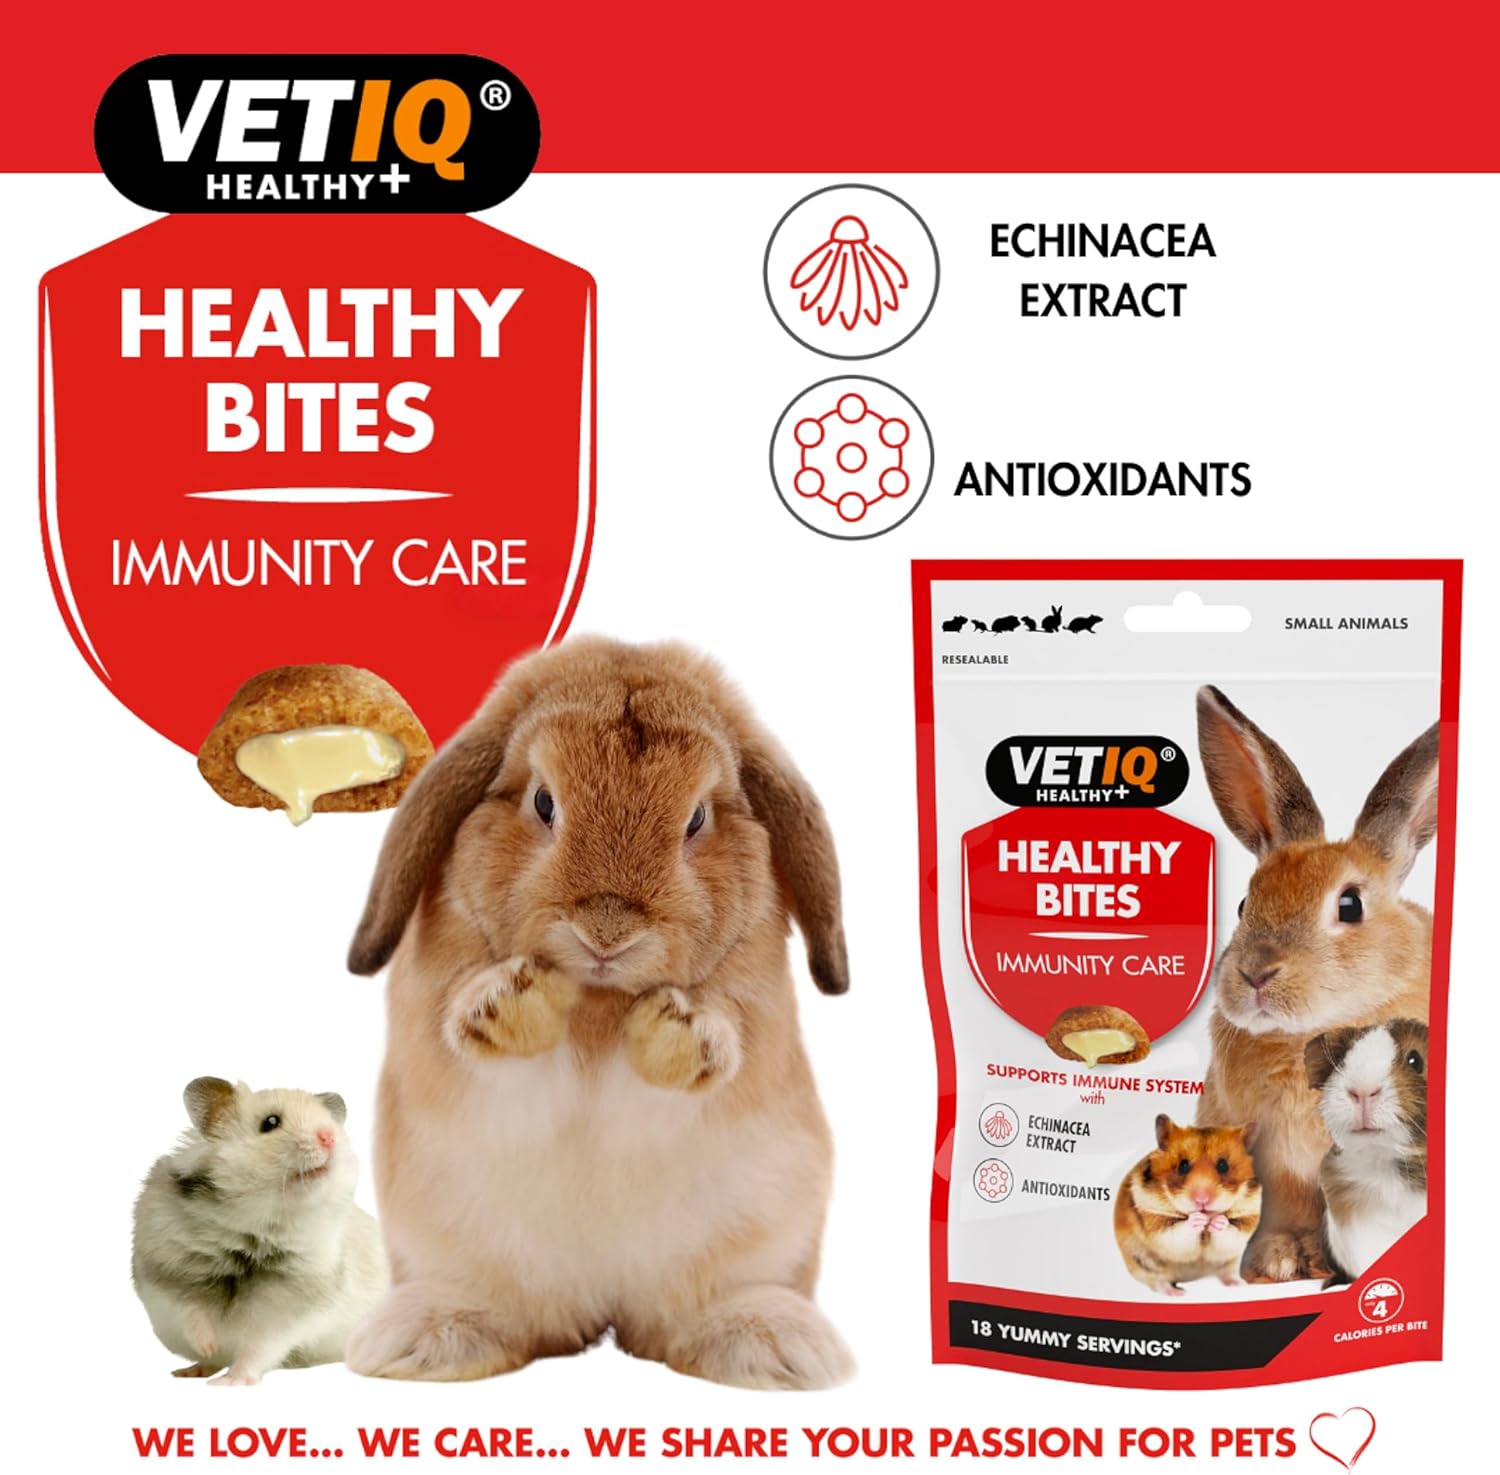 VETIQ Healthy Bites Immunity Care Treats For Small Animals With Echinacea to Help Support the Immune System & Prebiotic Fibre to Support a Healthy Digestion, 30 g (Pack of 4) :Pet Supplies